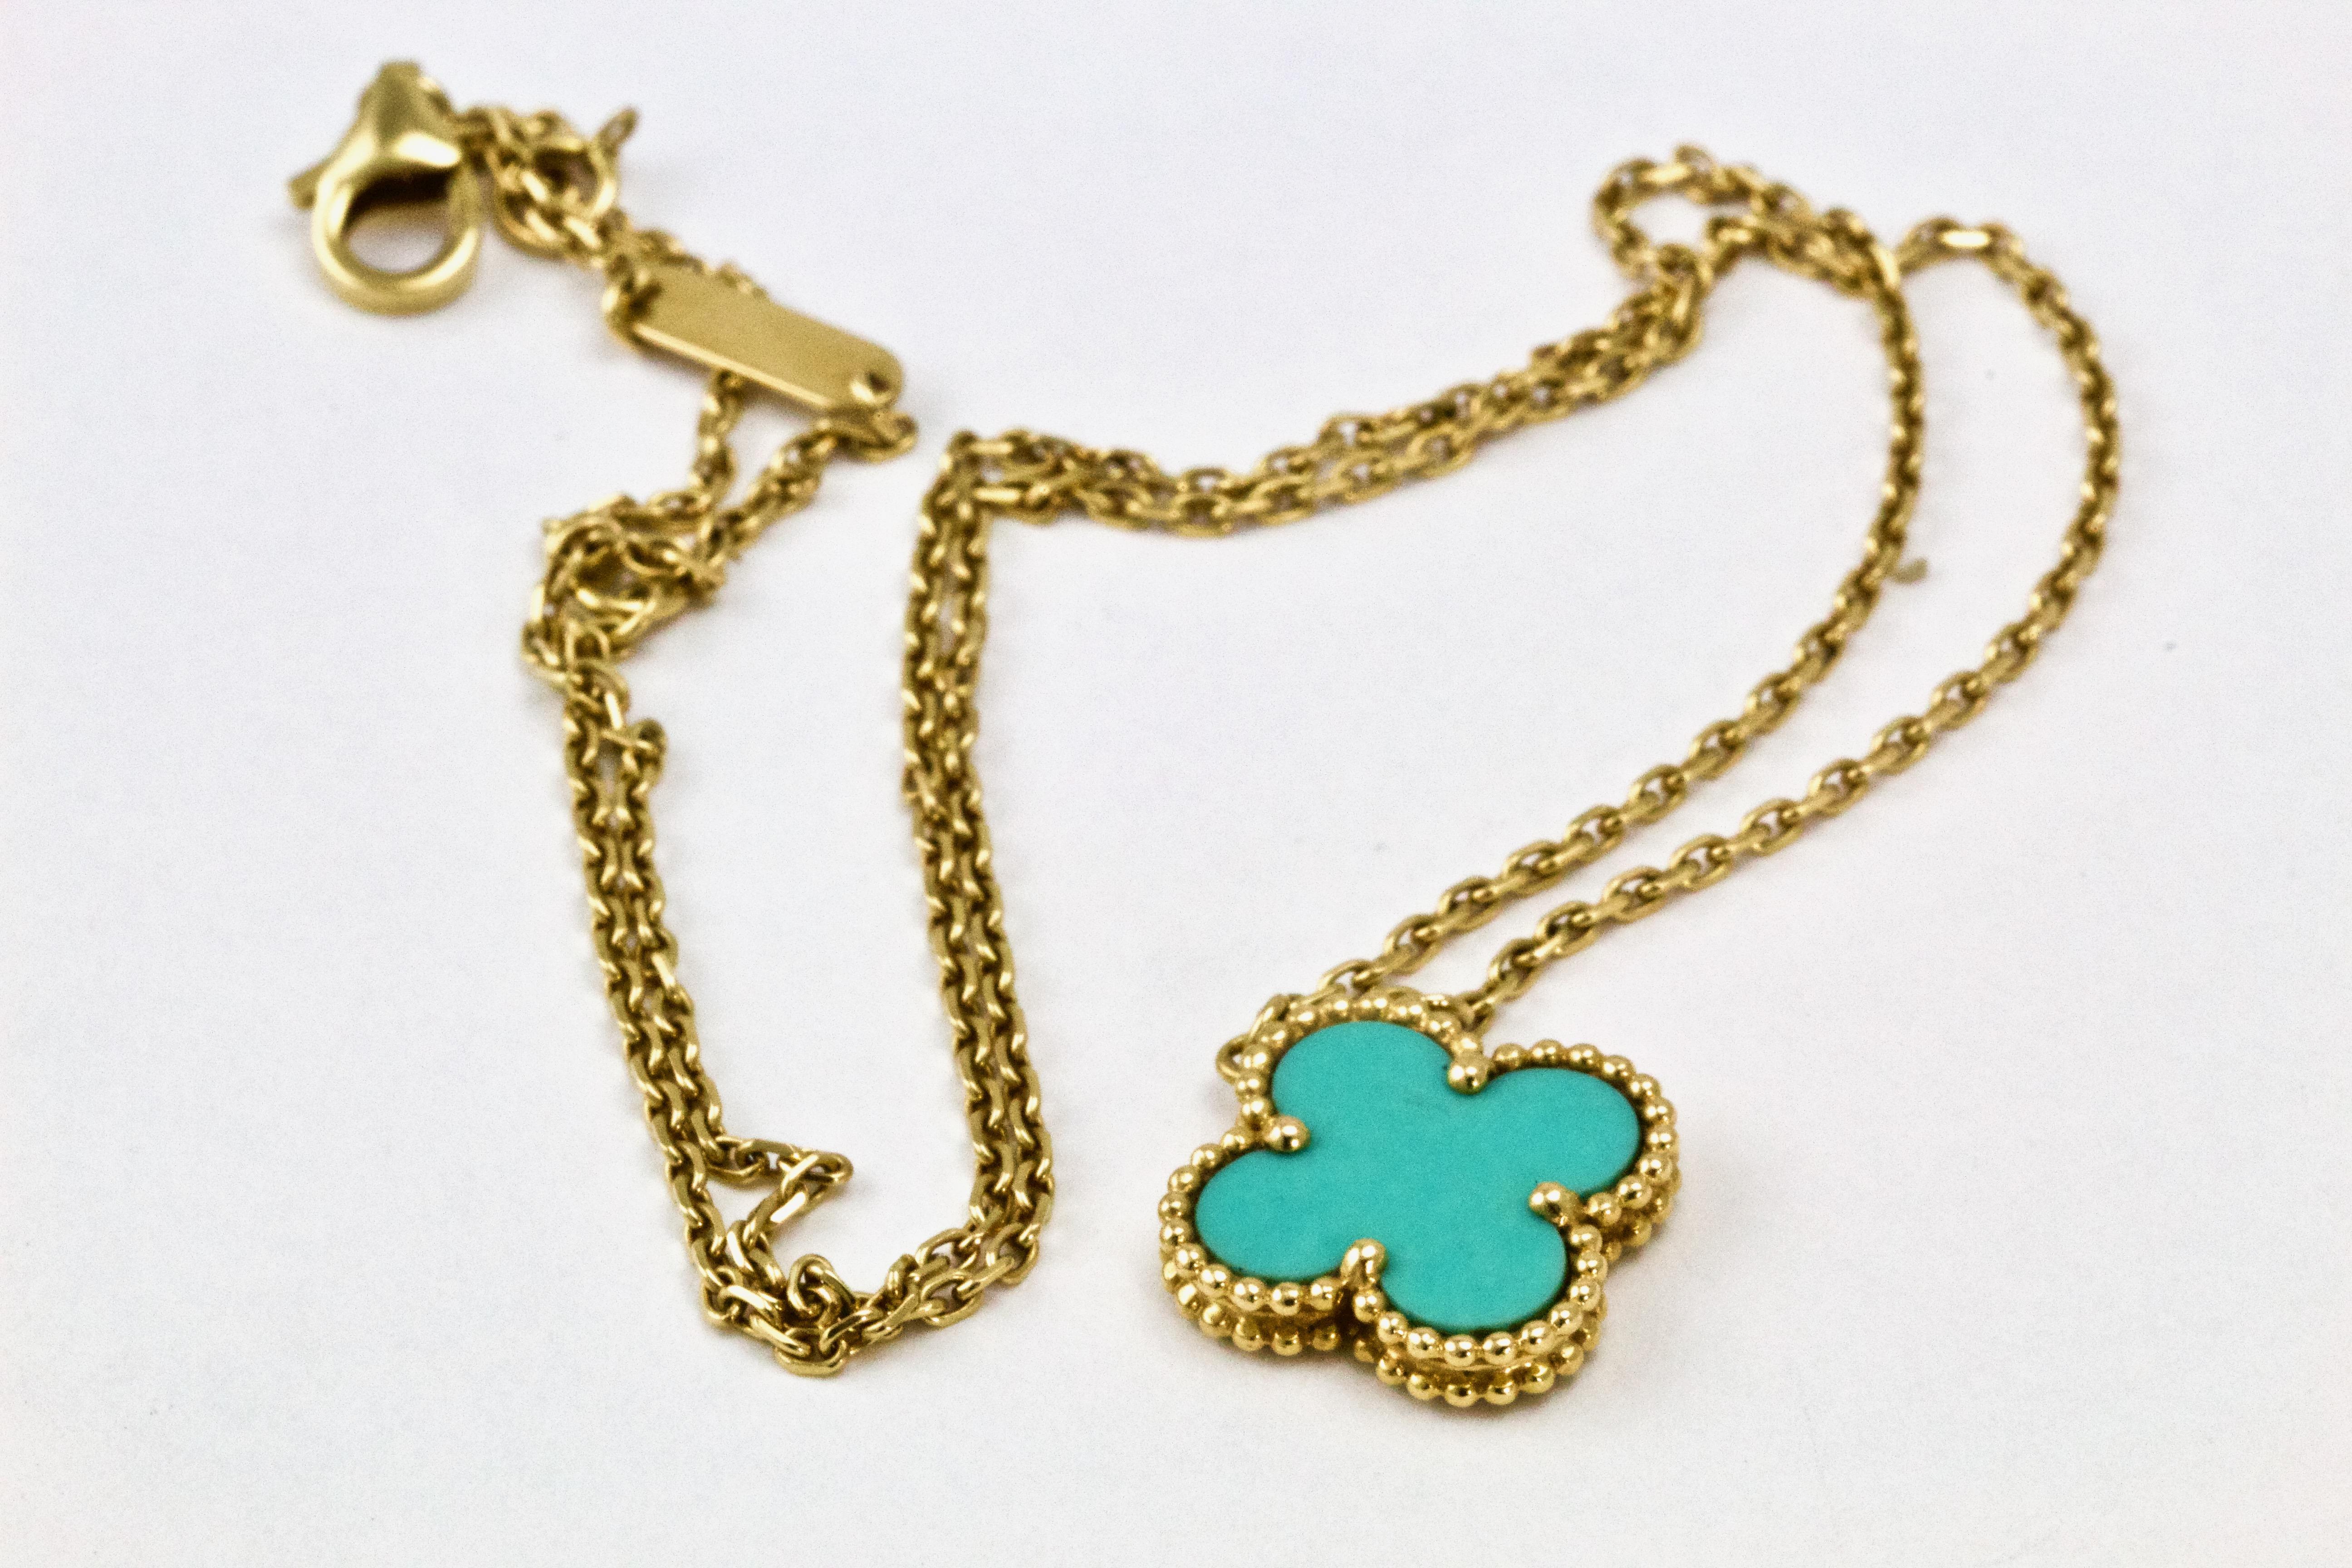 Luxury and the beauty of nature meet with this stunning Van Cleef & Arpels 18k Gold and Turquoise Vintage Alhambra Pendant. This emblematic and celebrated clover shaped pendant has been a favourite among fans and is made of gorgeous turquoise stone